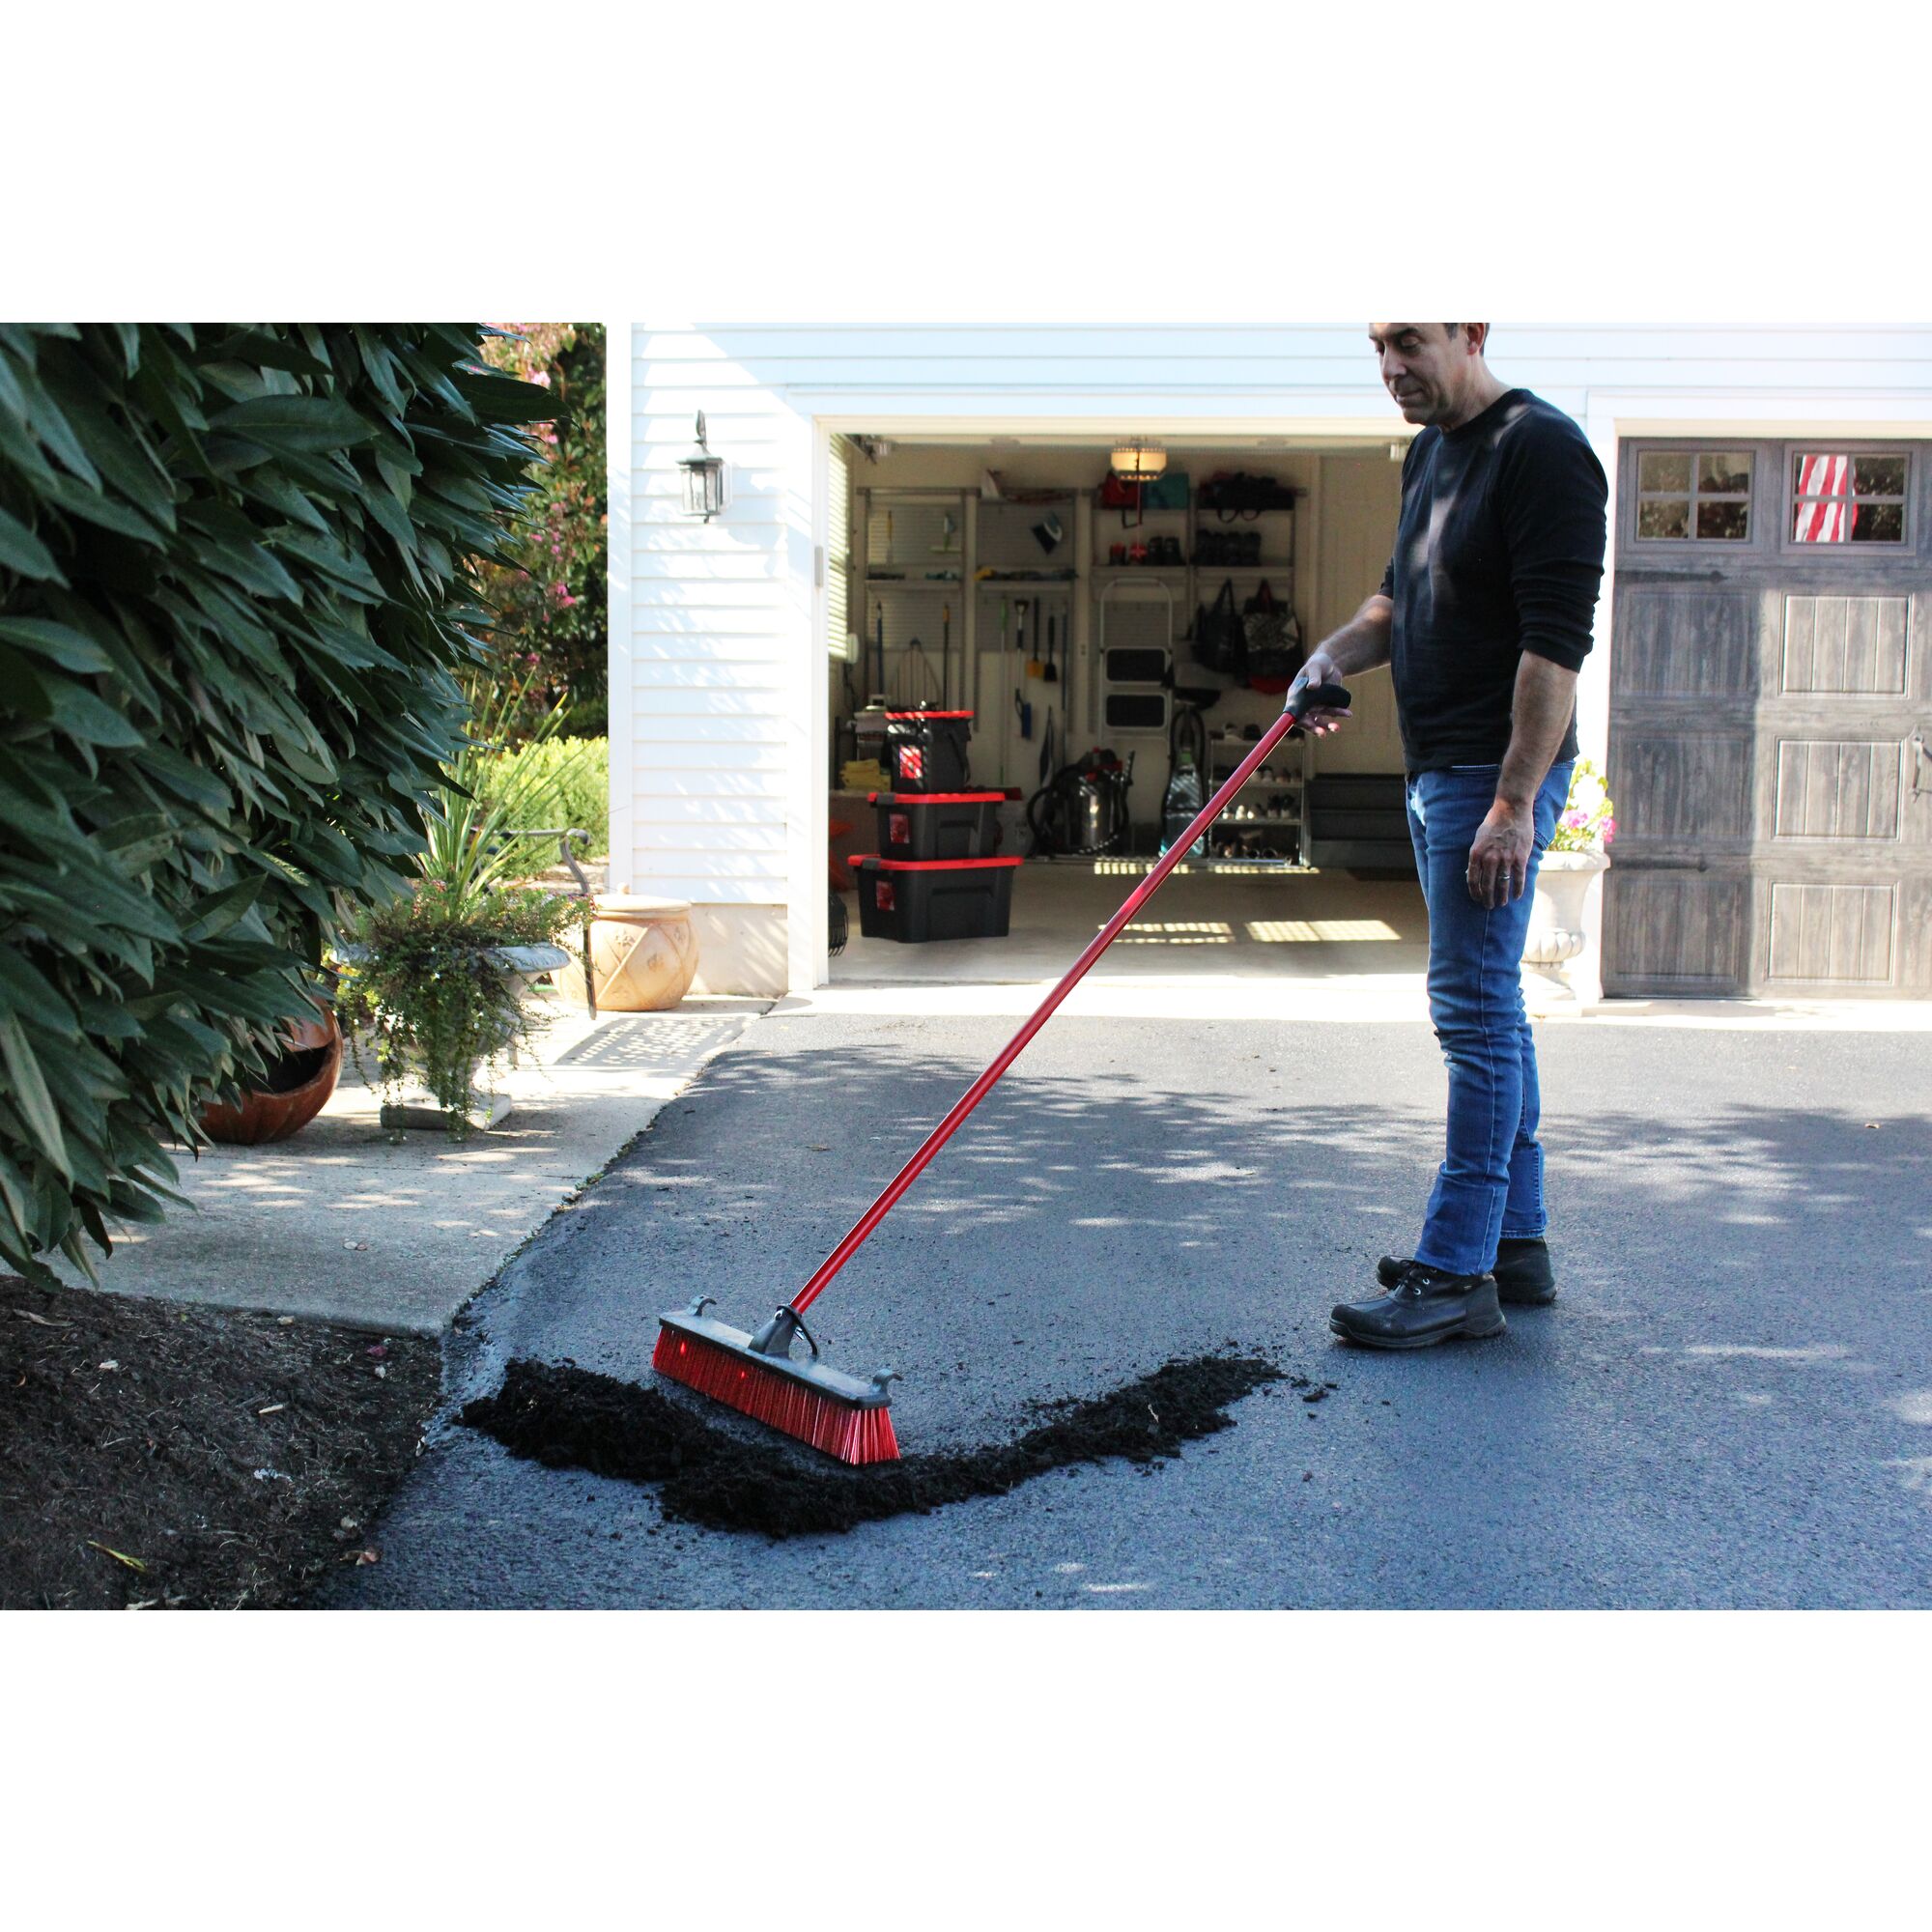 24 inch heavy duty push broom being used by a person to push dirt aside.